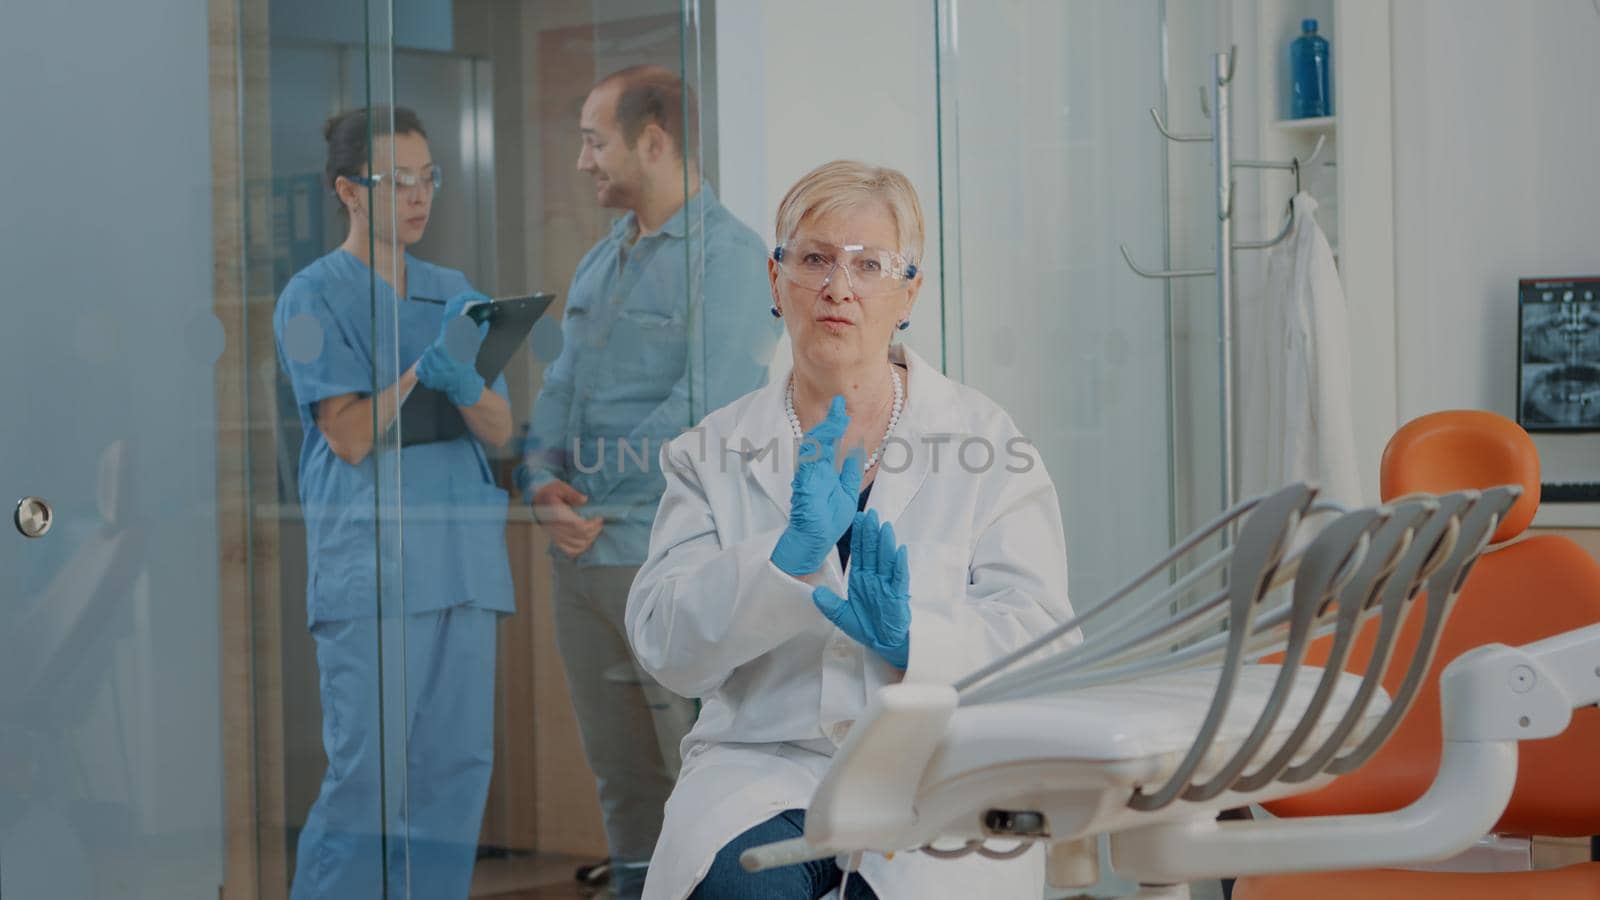 POV of dentistry expert using online video call to give stomatological advice to patient on remote communication. Senior dentist explaining oral care on video teleconference call.